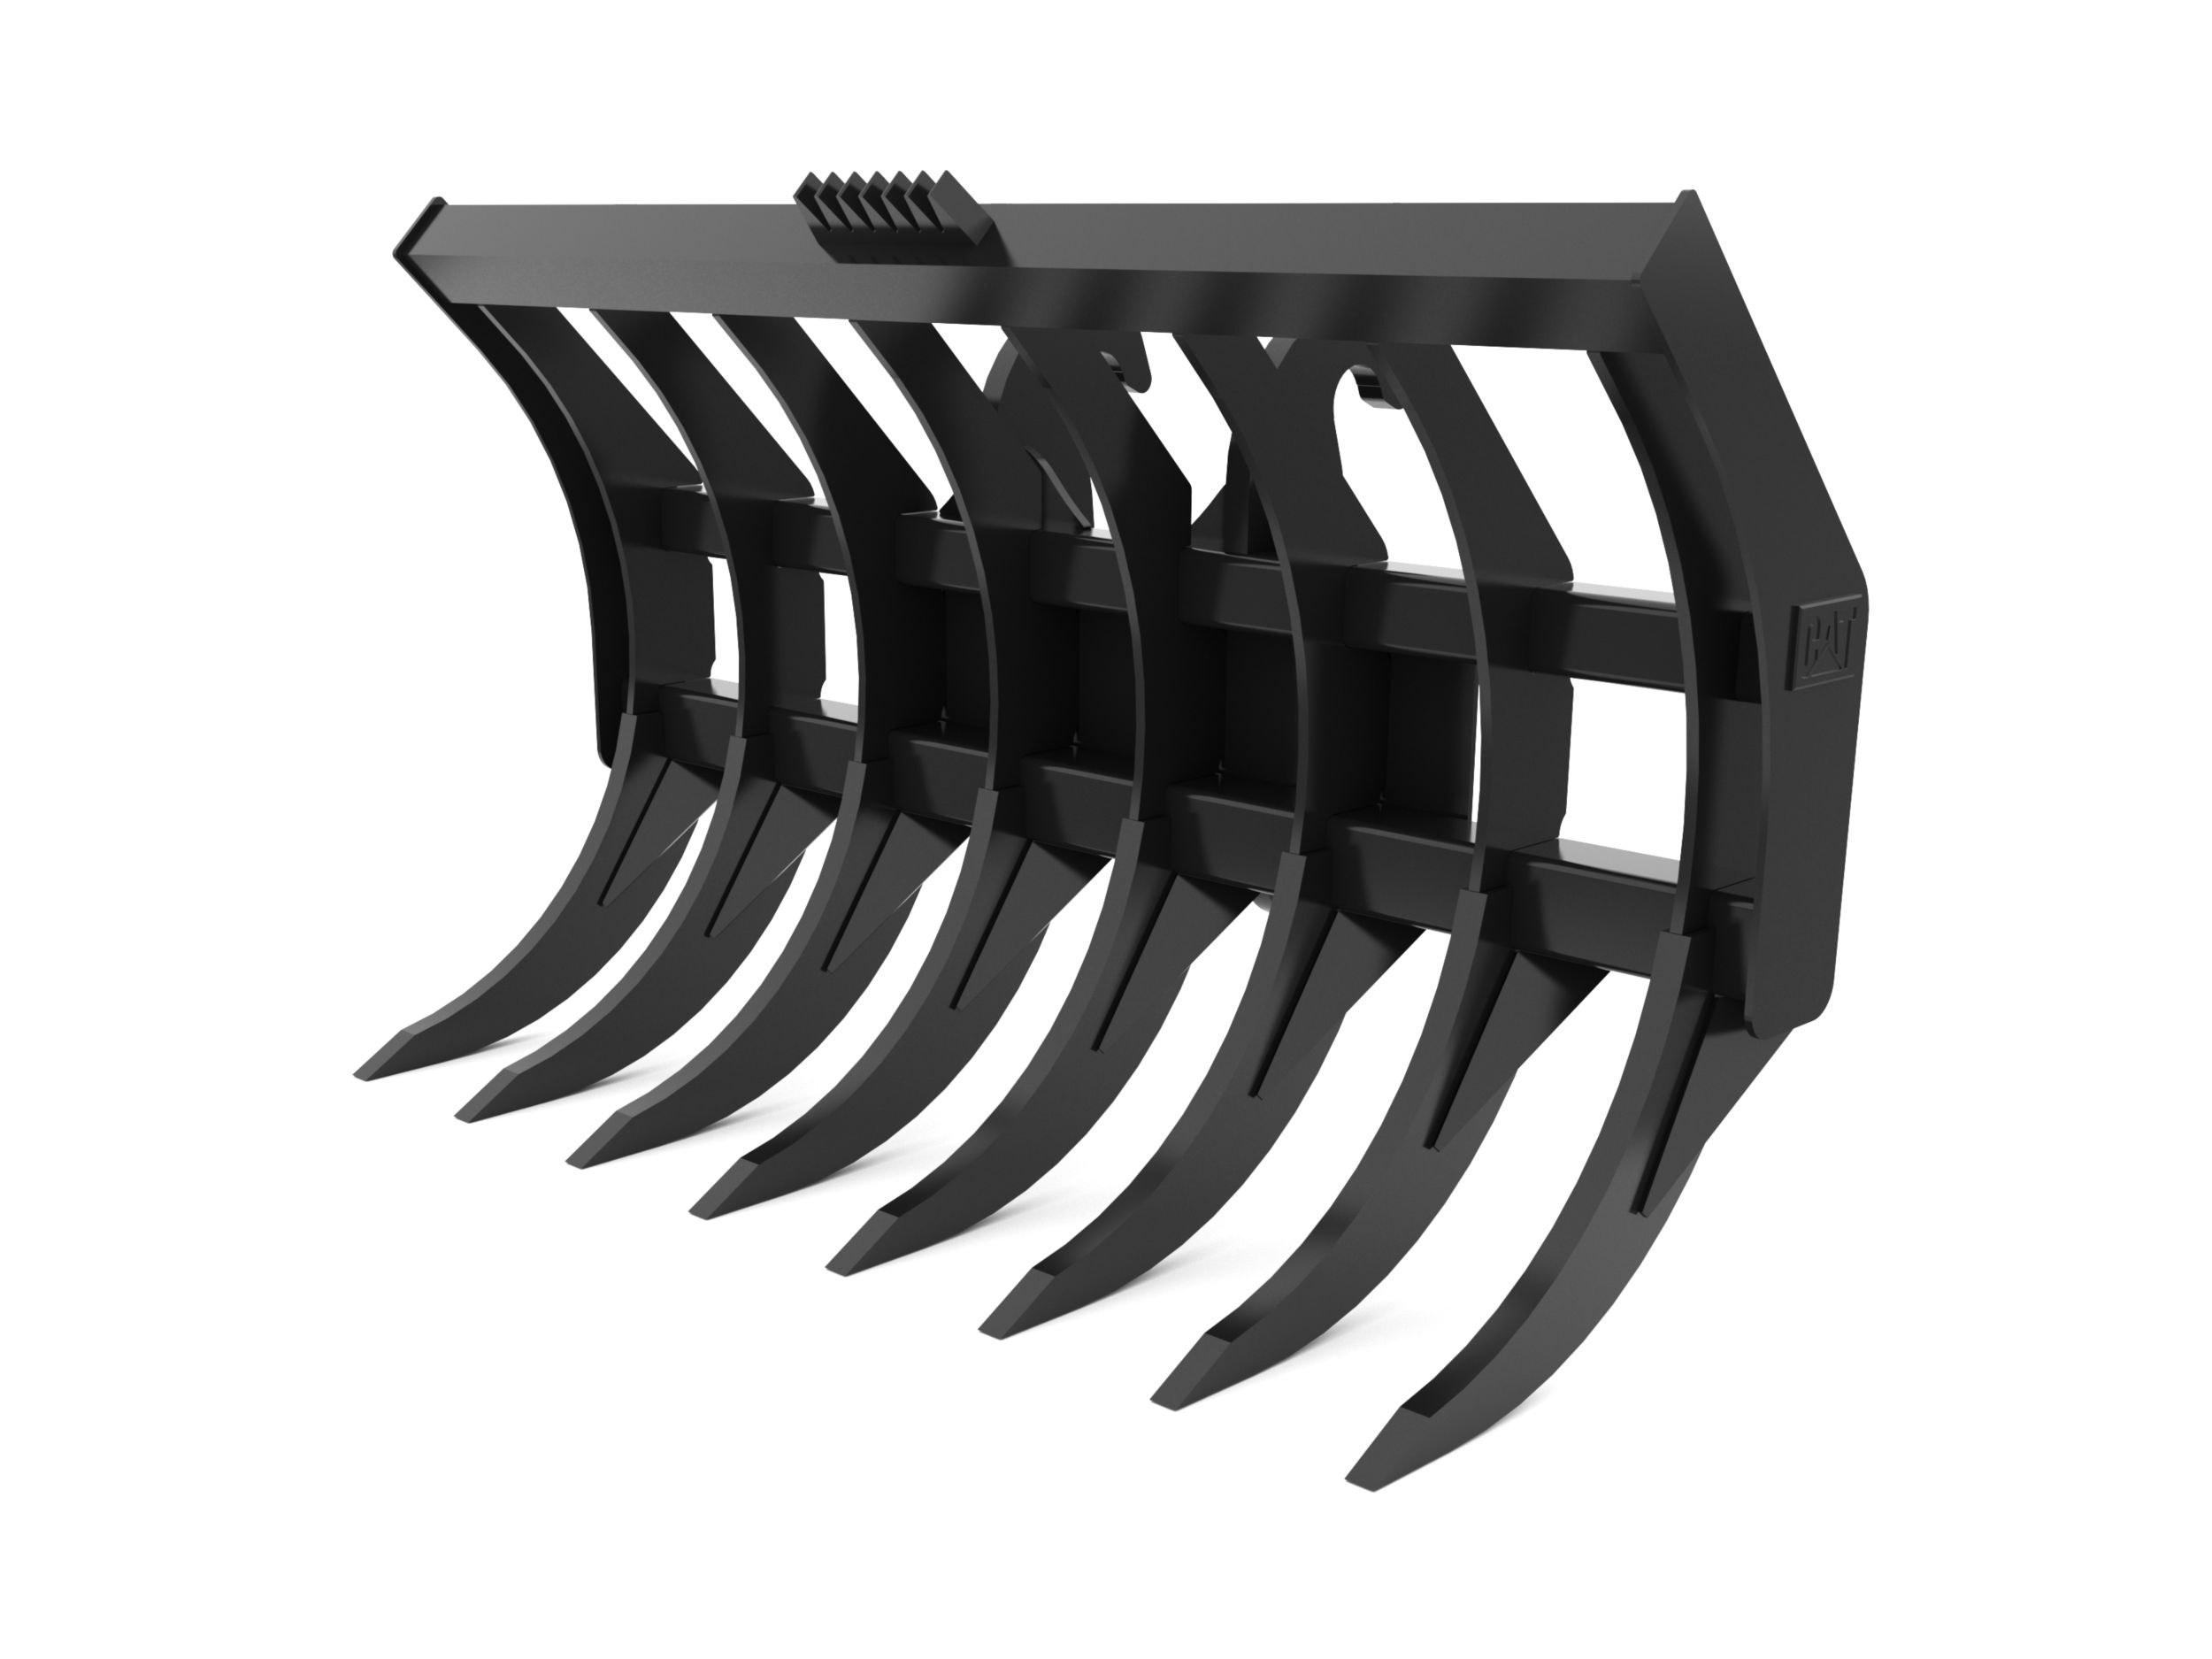 New Cat® Rakes for Sale in CO, NM, TX | Wagner Equipment Co.